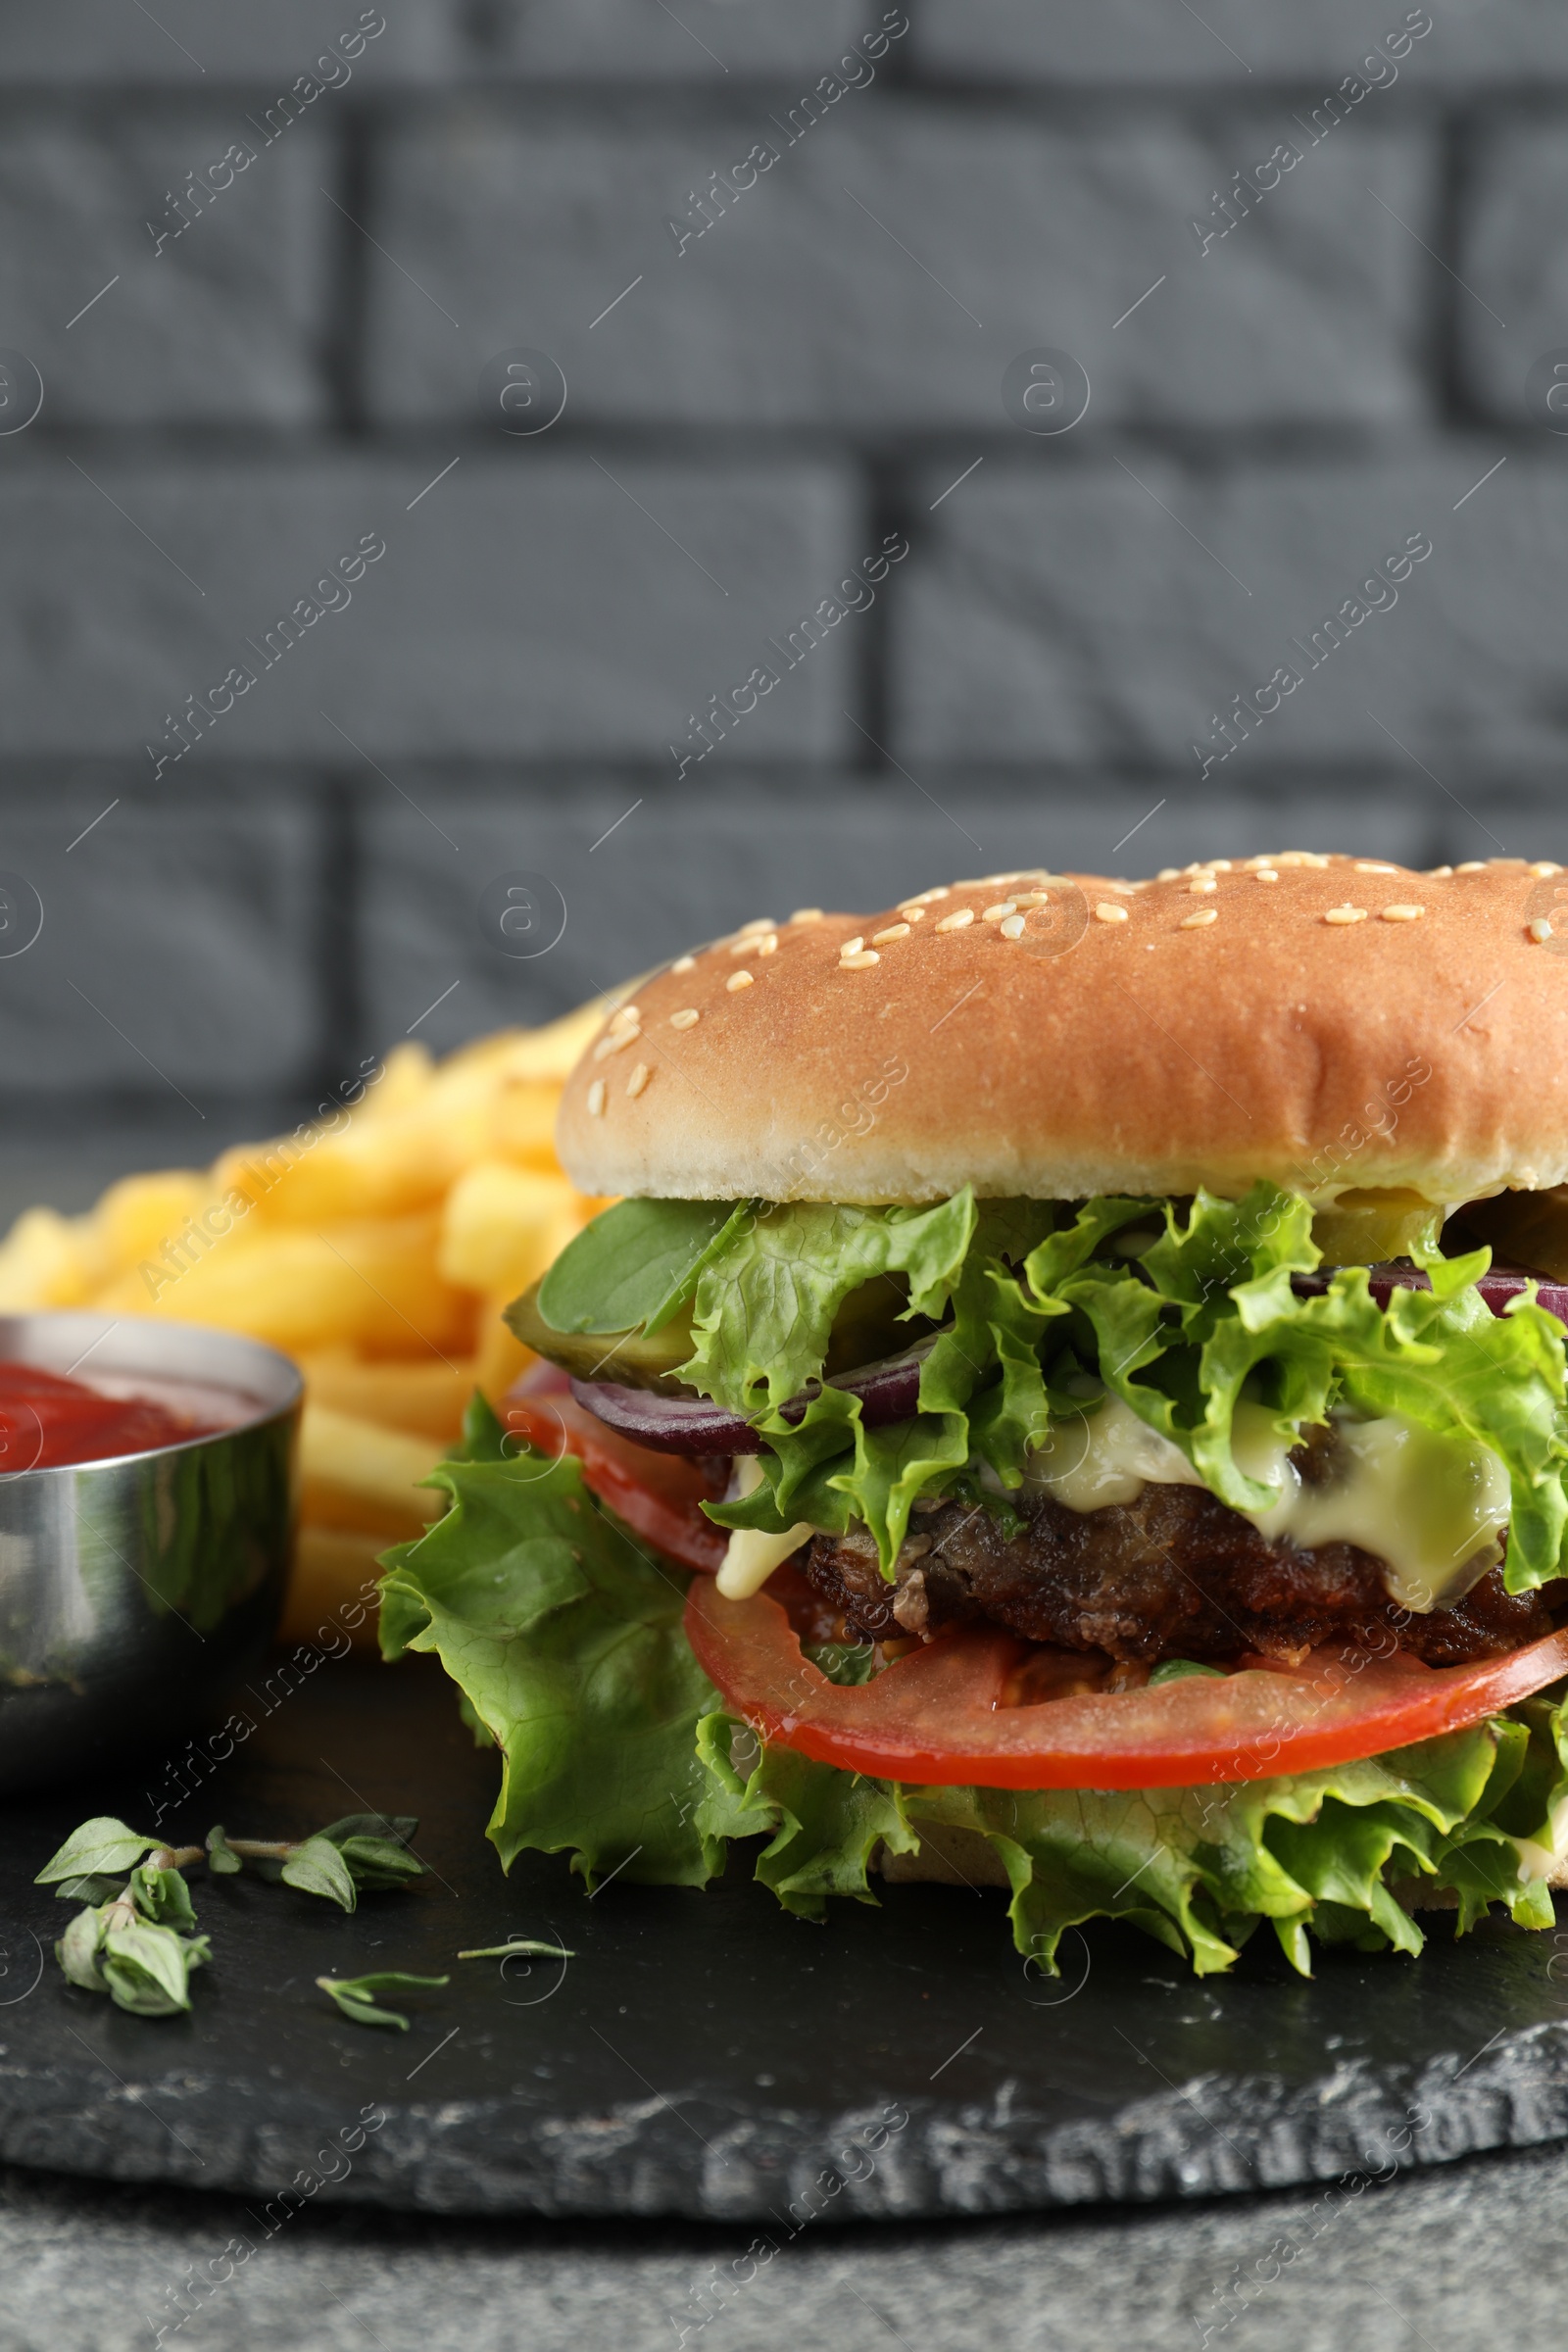 Photo of Delicious burger with beef patty, tomato sauce and french fries on grey table, closeup